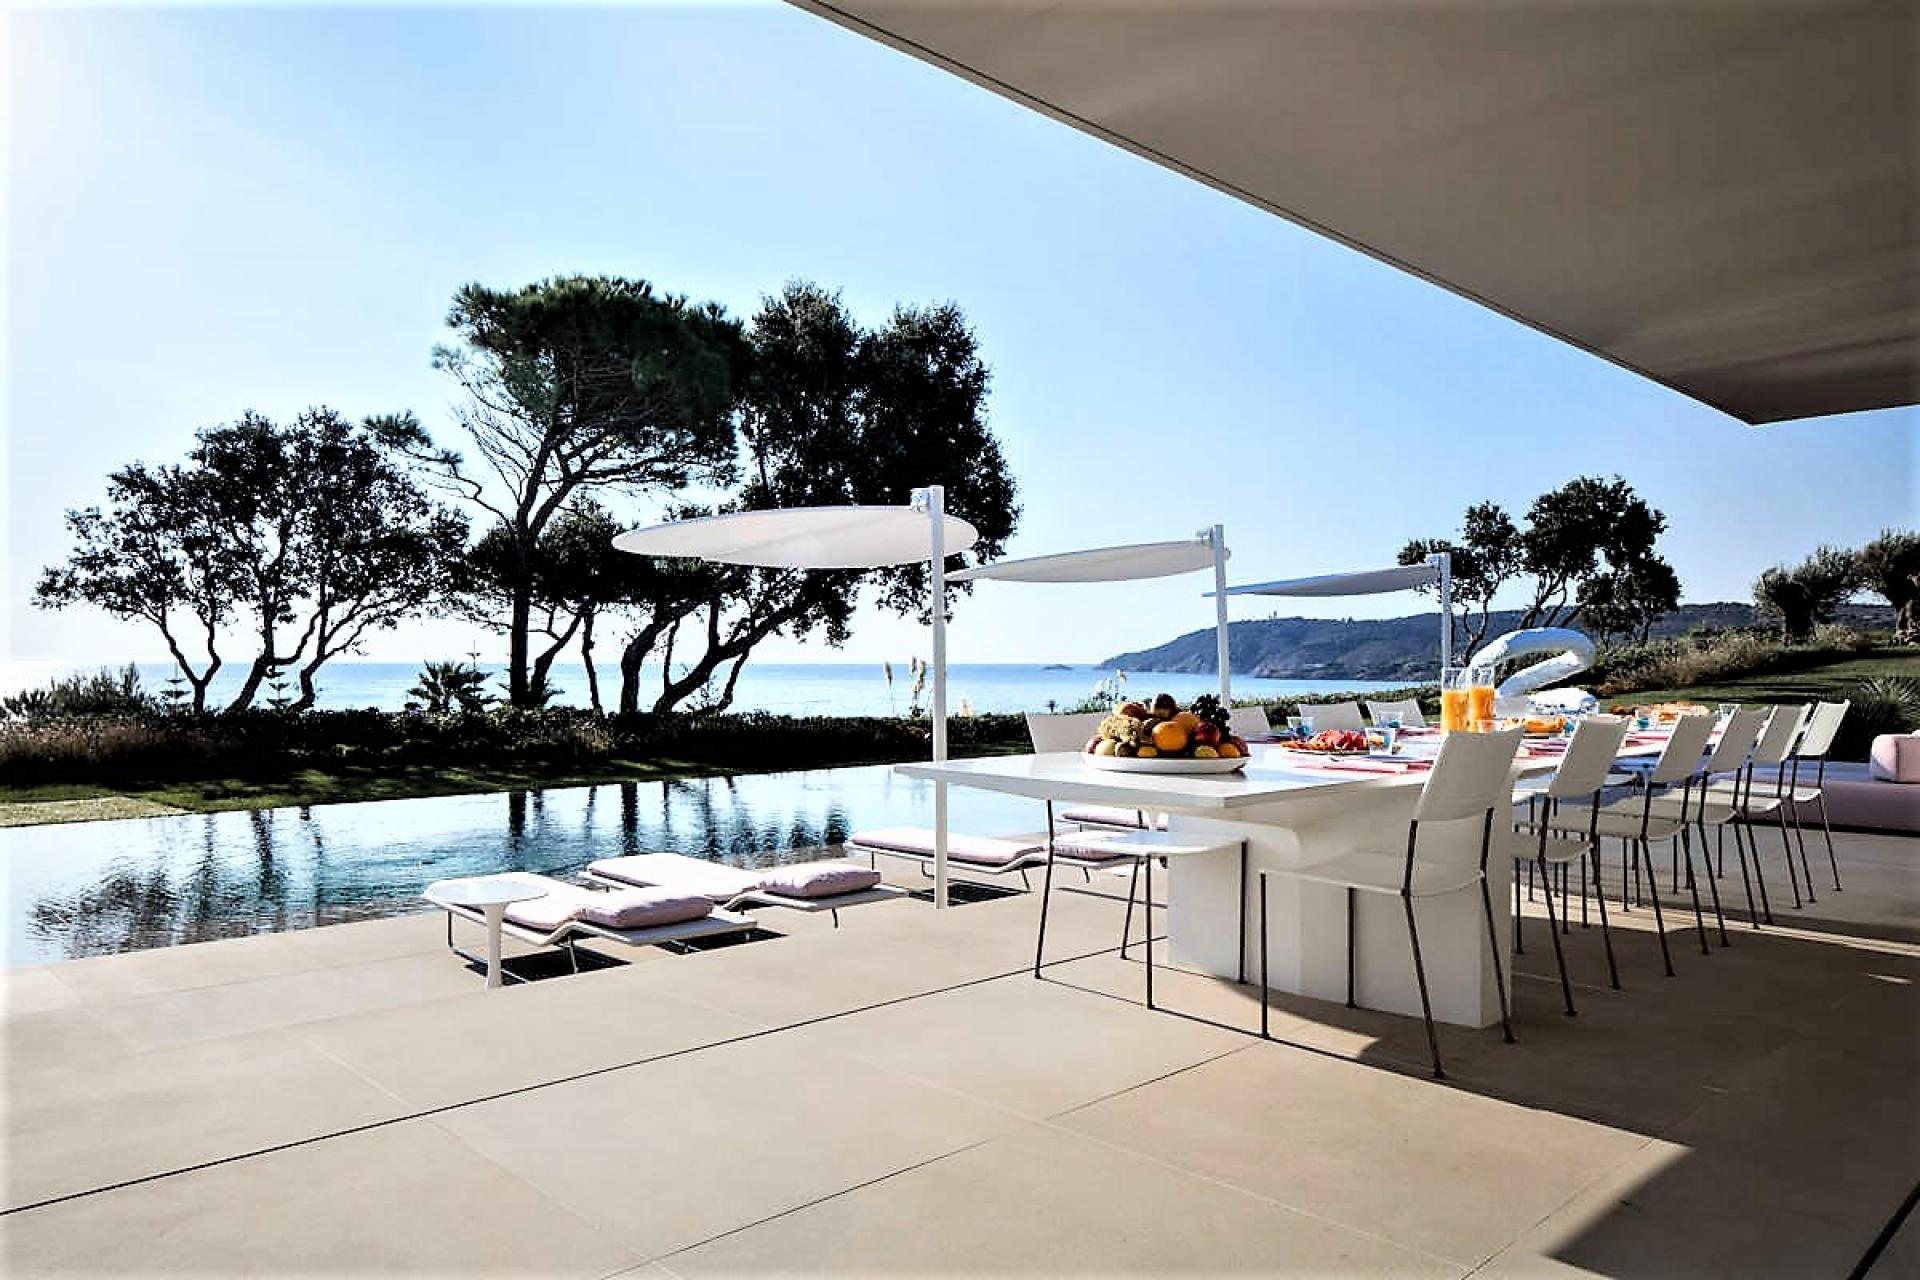 RENT A BEAUTIFUL HOLIDAY VILLA IN COTE D AZUR